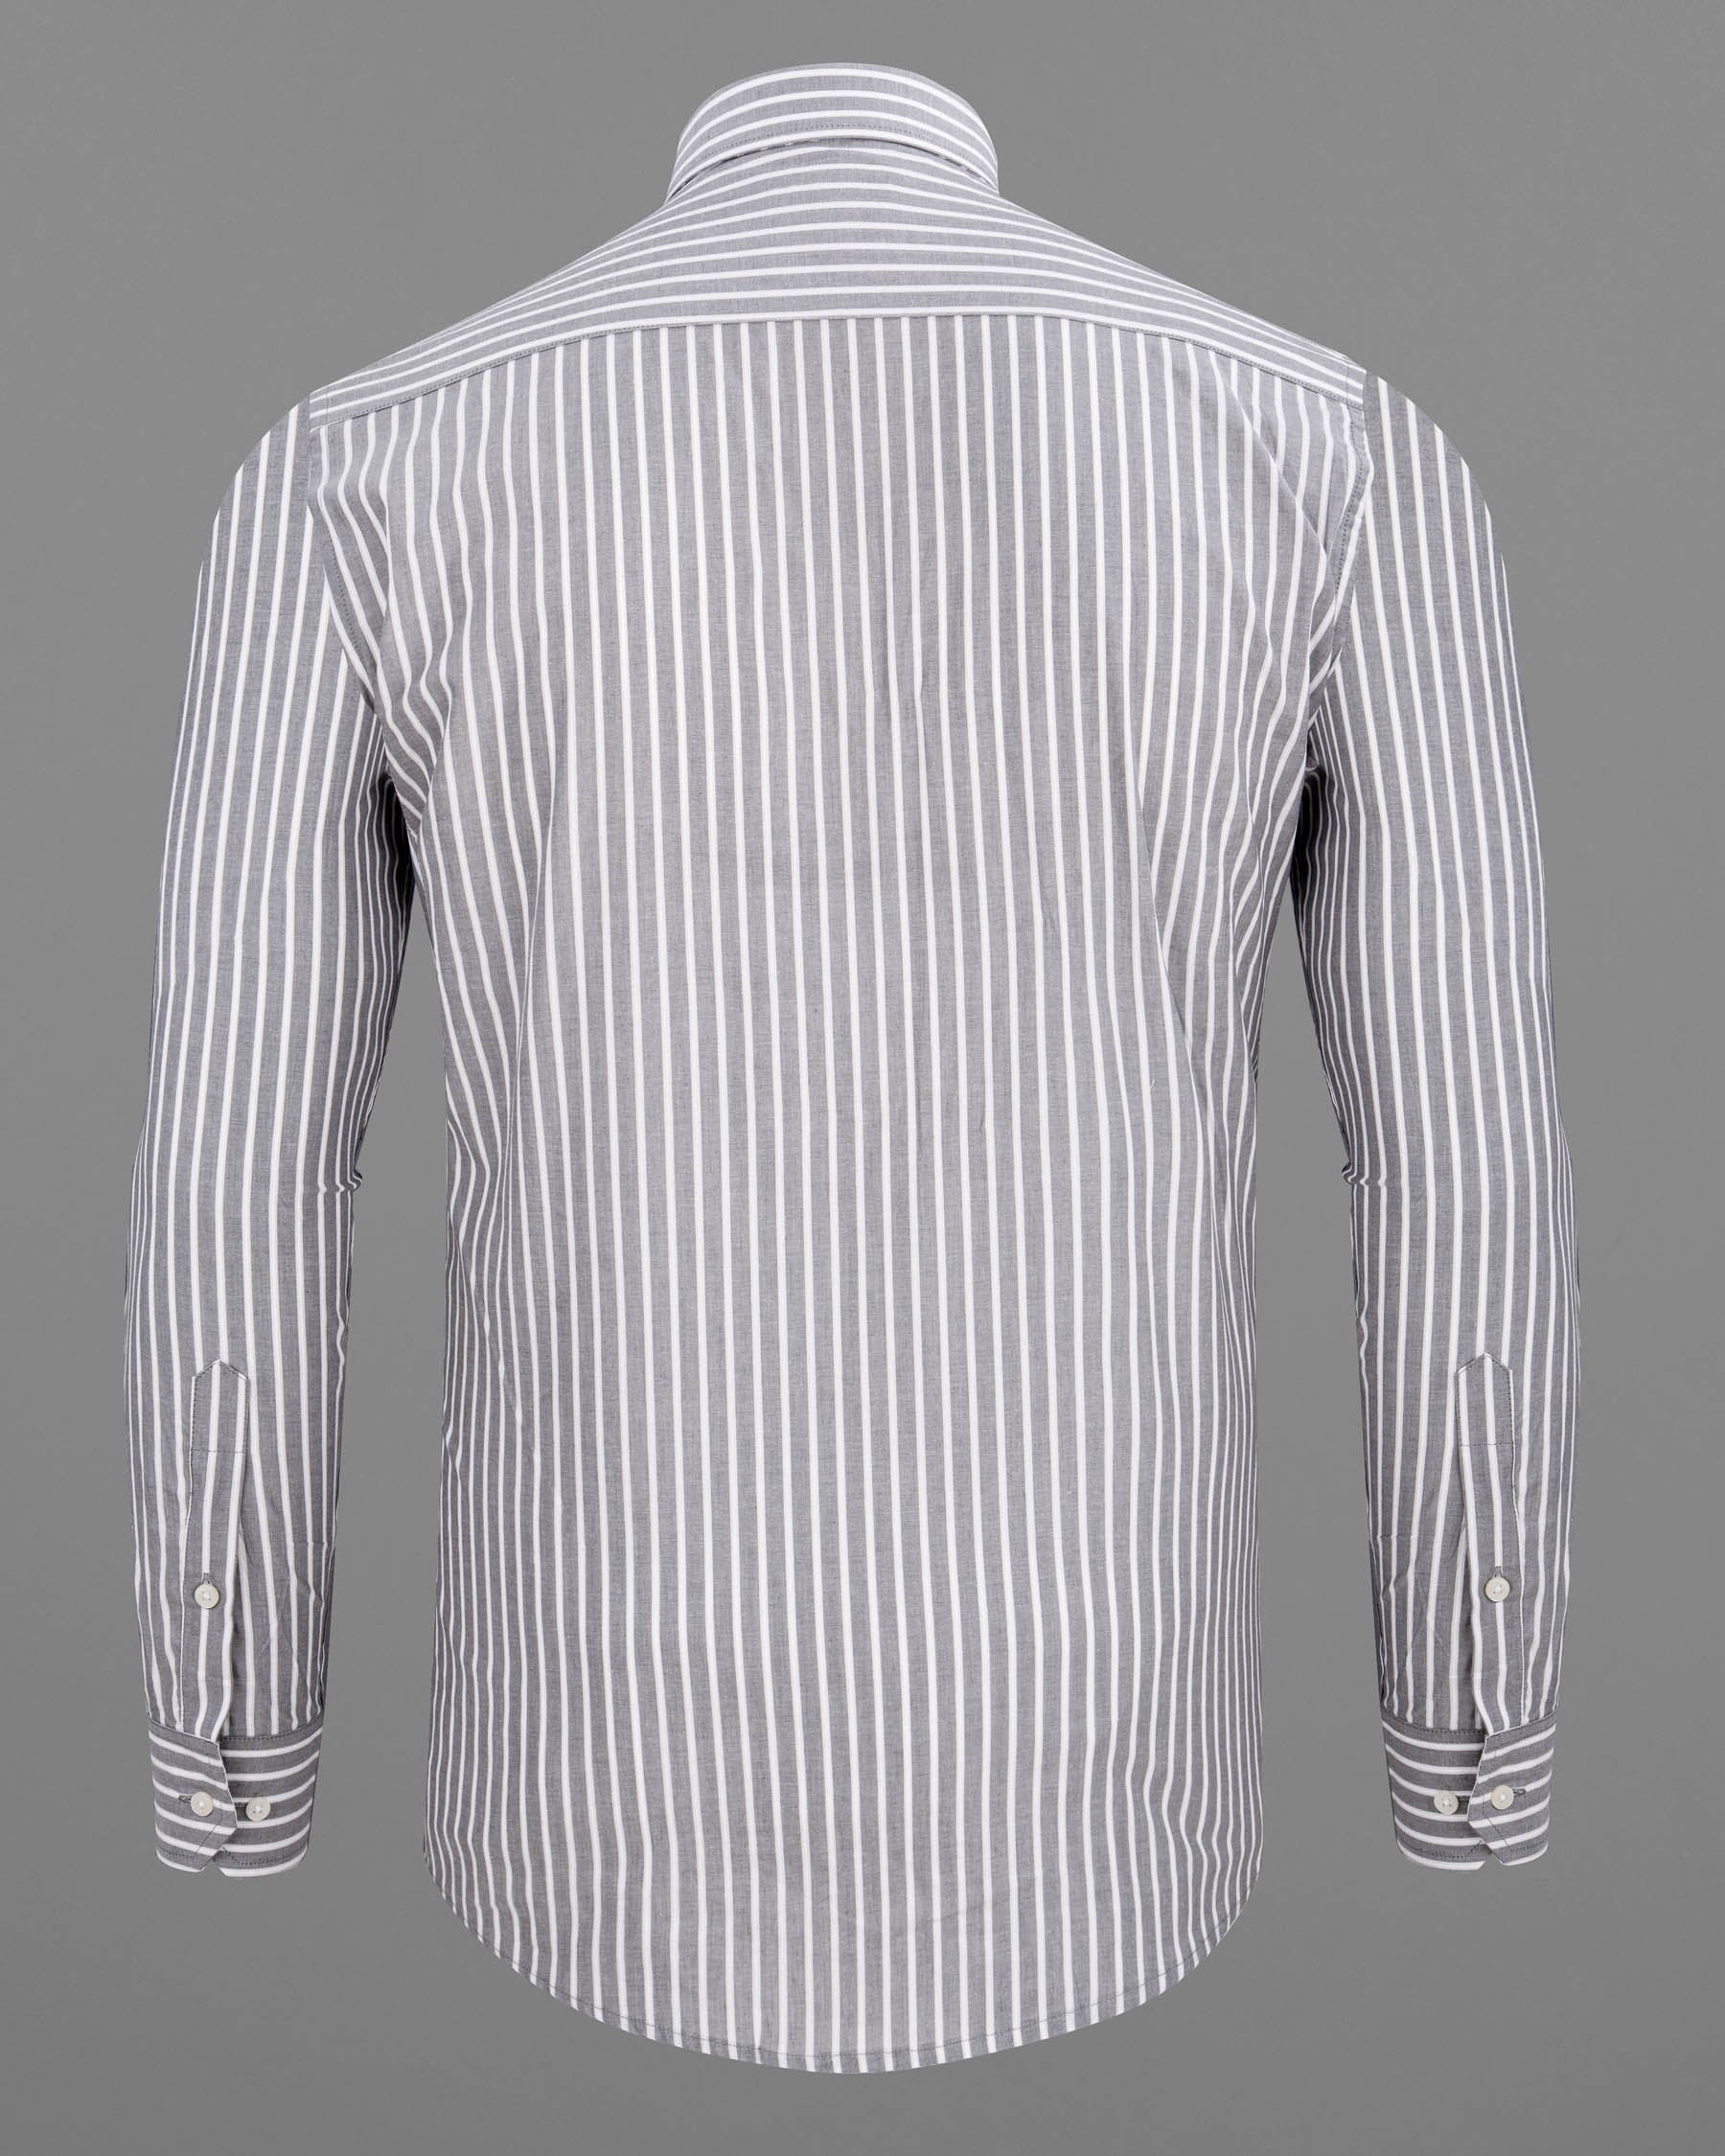 French Grey with White Striped Premium Cotton Shirt 6342-38,6342-H-38,6342-39,6342-H-39,6342-40,6342-H-40,6342-42,6342-H-42,6342-44,6342-H-44,6342-46,6342-H-46,6342-48,6342-H-48,6342-50,6342-H-50,6342-52,6342-H-52